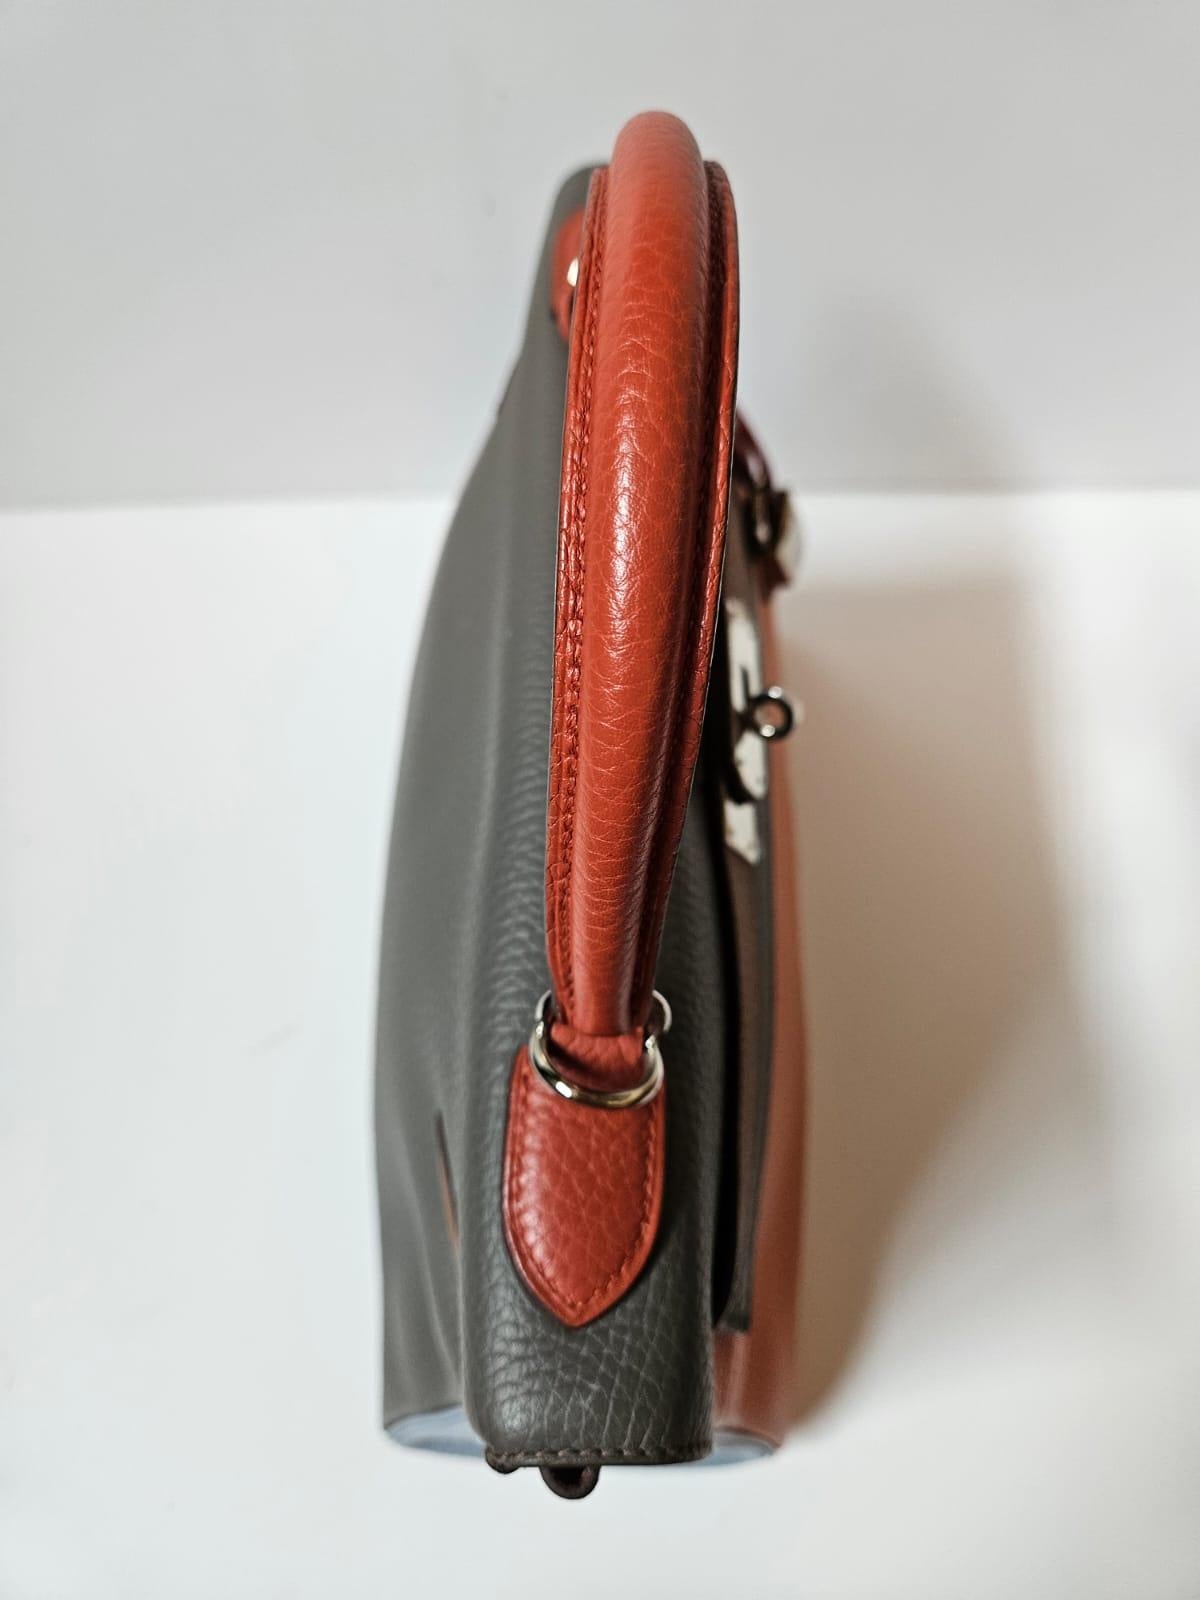 Rare arlequin kelly 32 bag in clemence leather. Overall still in very good condition, with minor marks on the body leather. Comes with its tools, strap and replacement dust bag (larger size dust bag). Stamp square Q (2013)